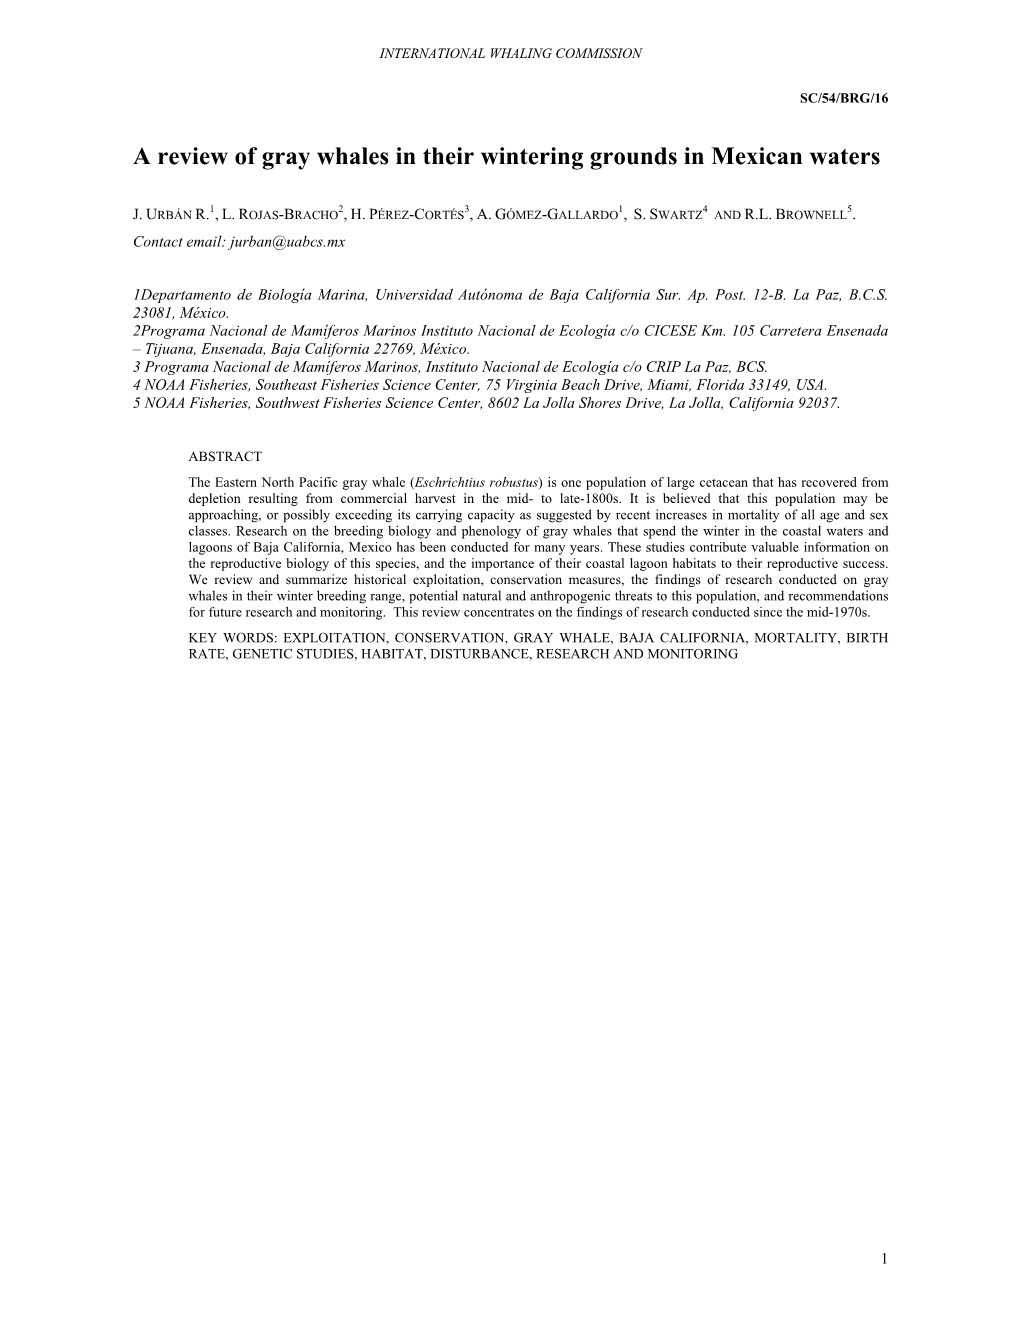 A Review of Gray Whales in Their Wintering Grounds in Mexican Waters